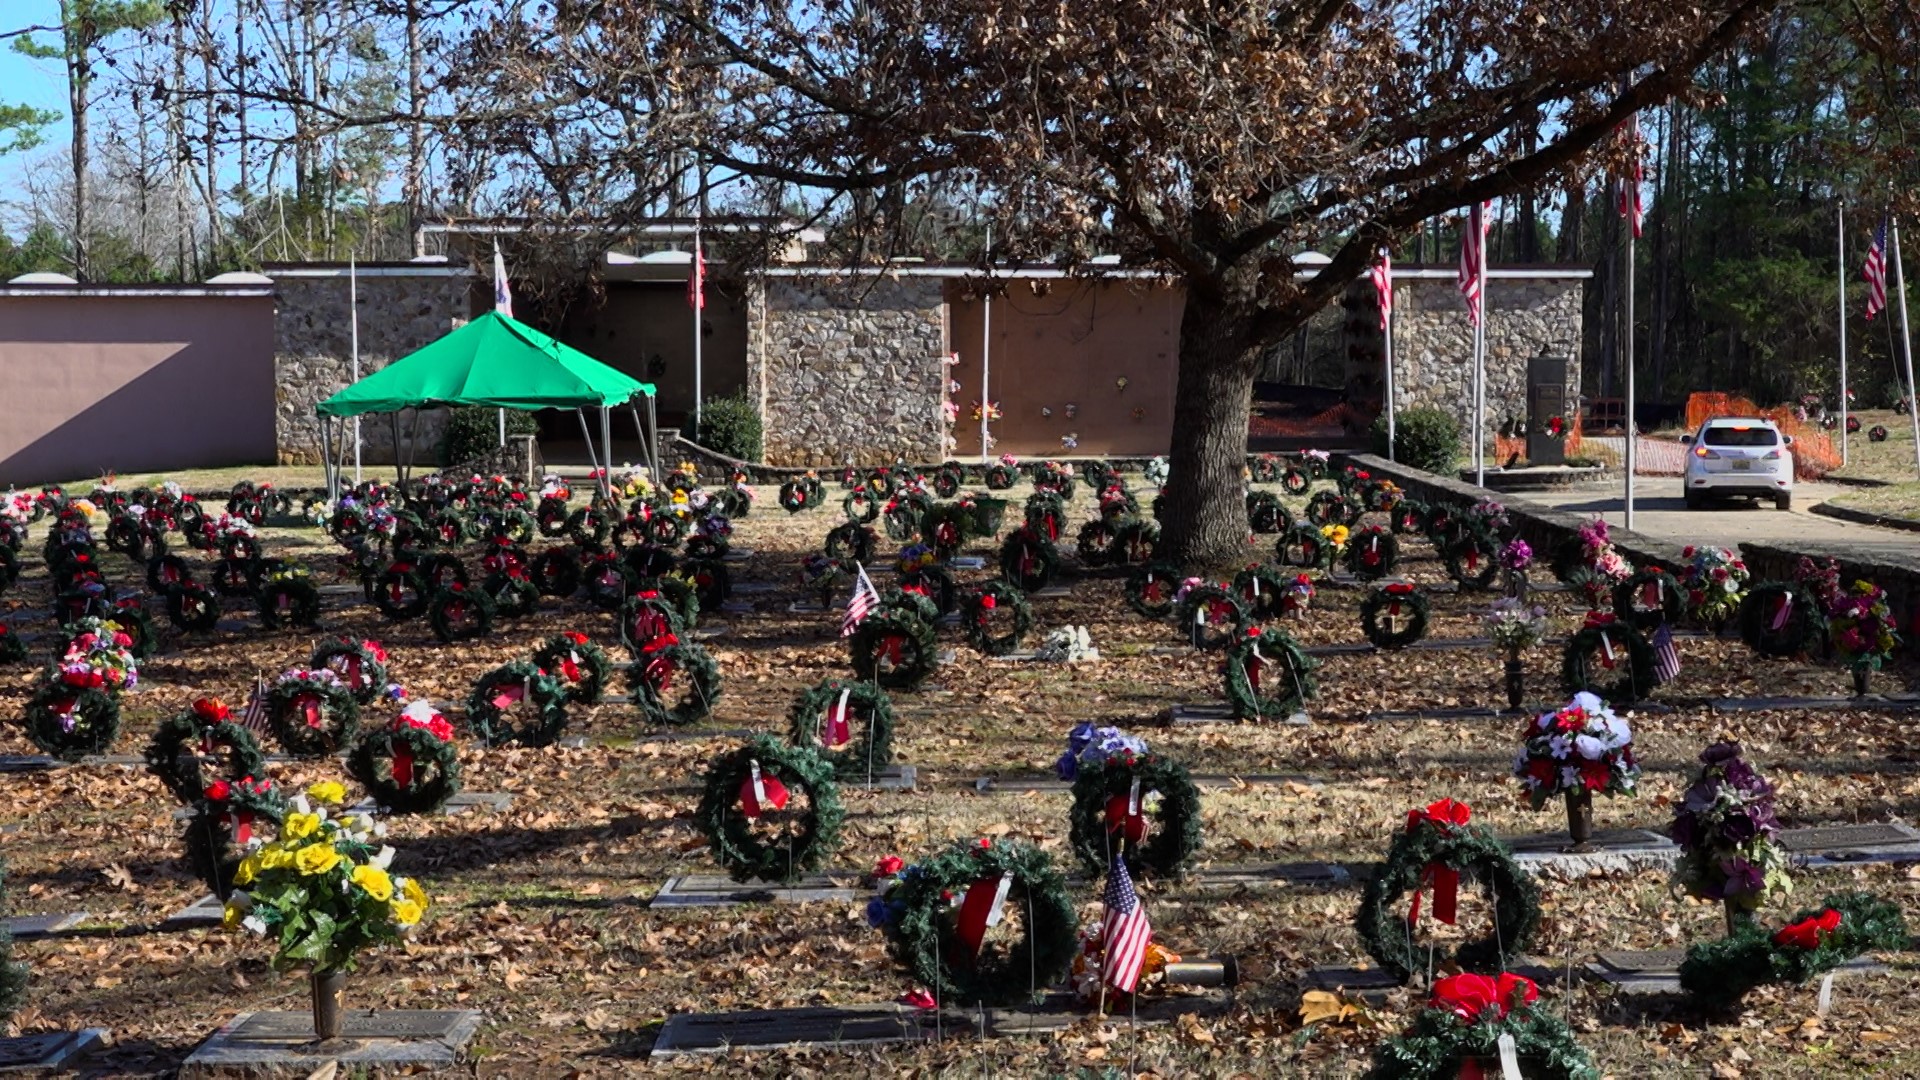 Sedona Meadows speaks with locals about "National Wreaths Across America Day".